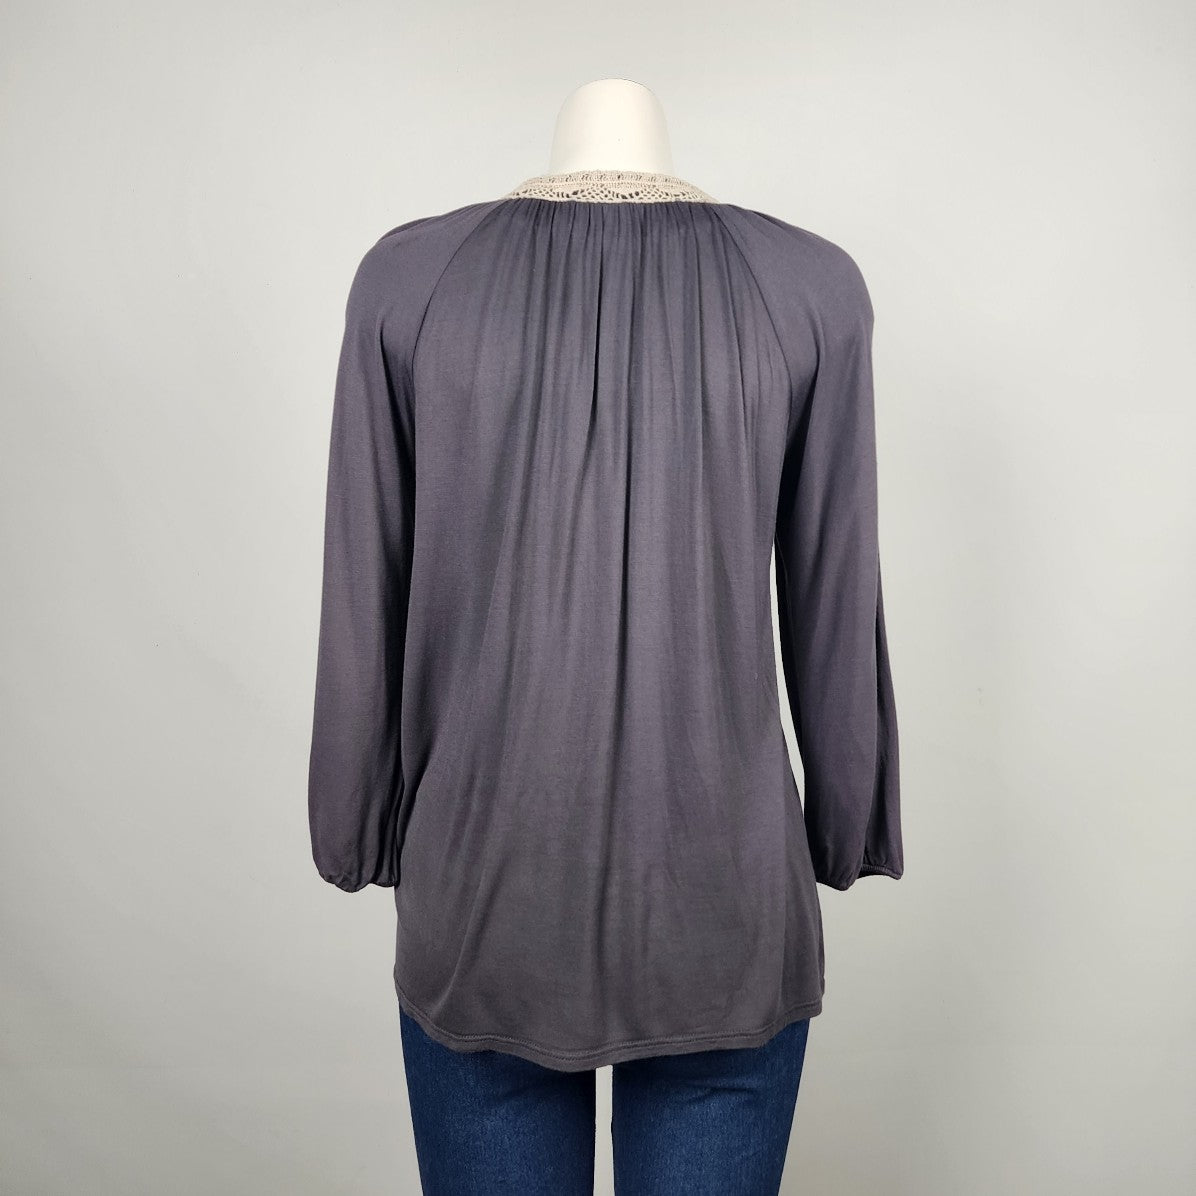 Anthropologie One September Grey Long Sleeve Peasant Top Size XS/S